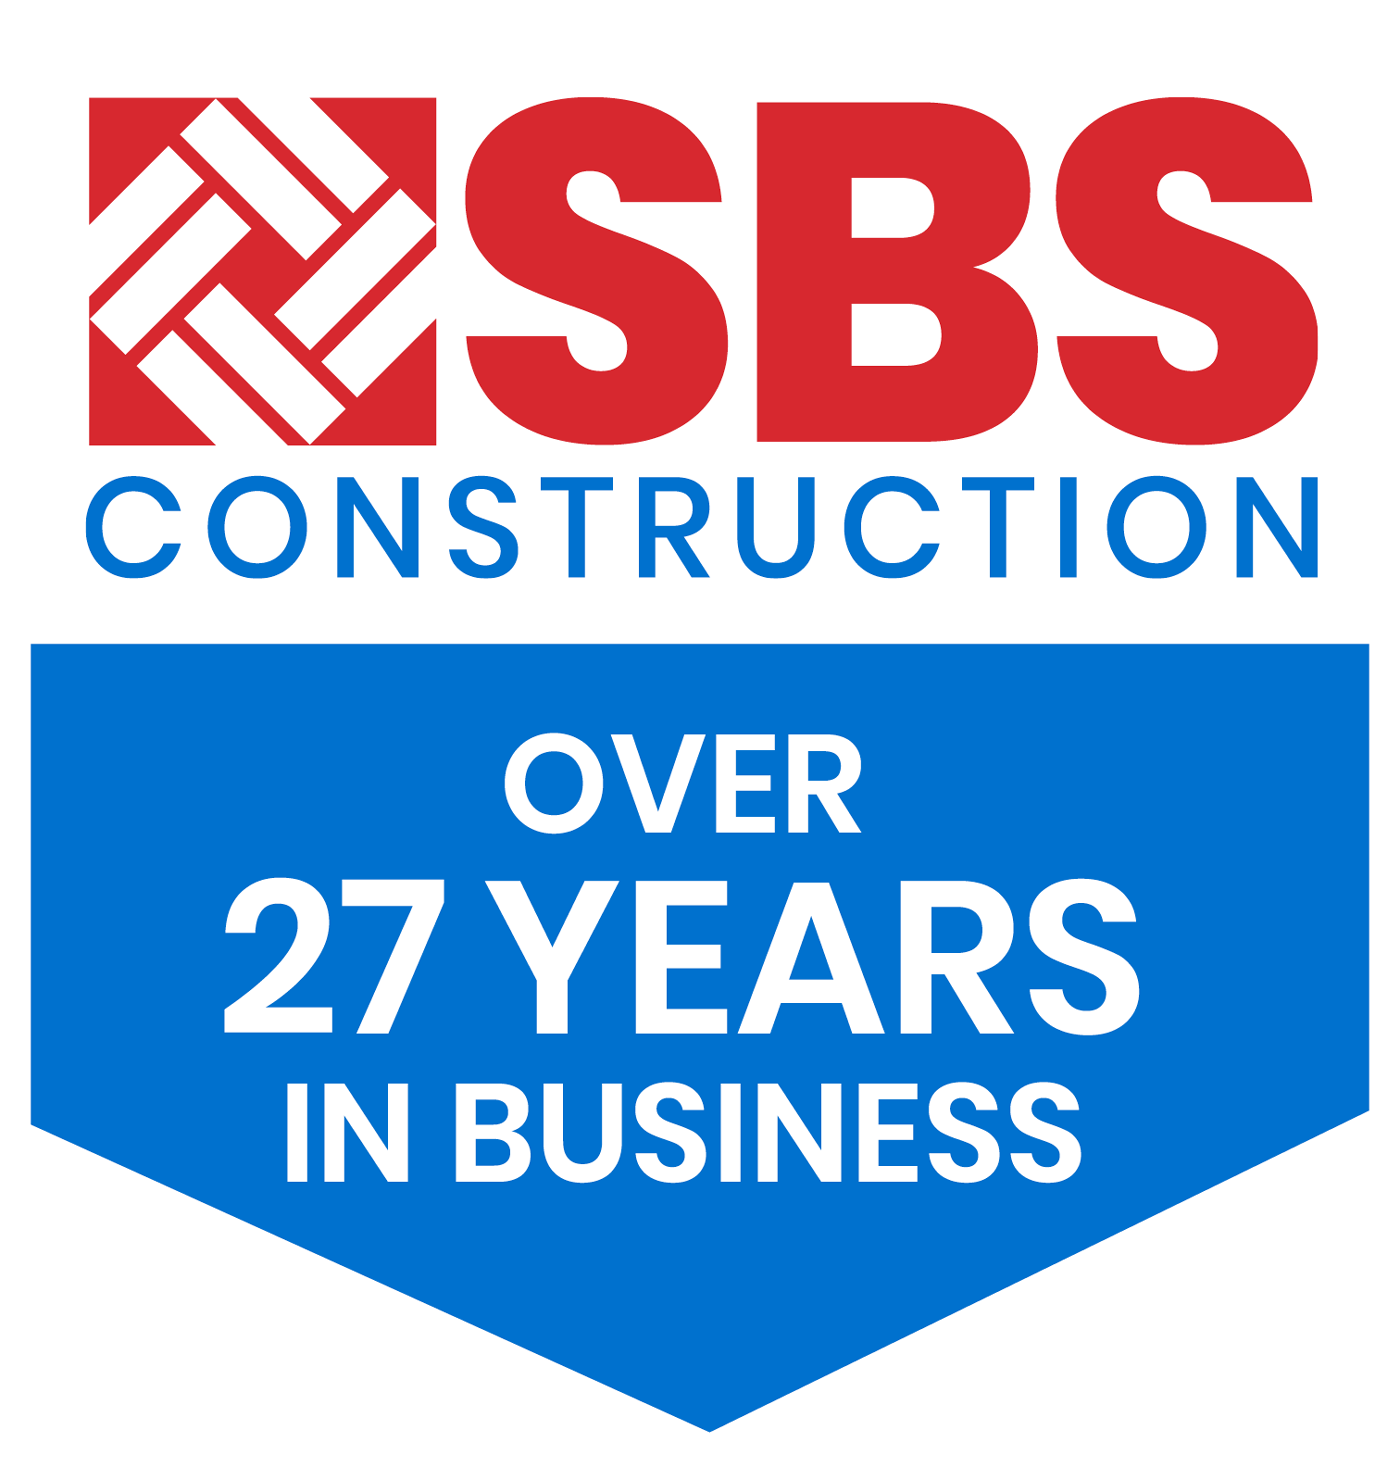 SBS Construction: Over 27 Years in Business